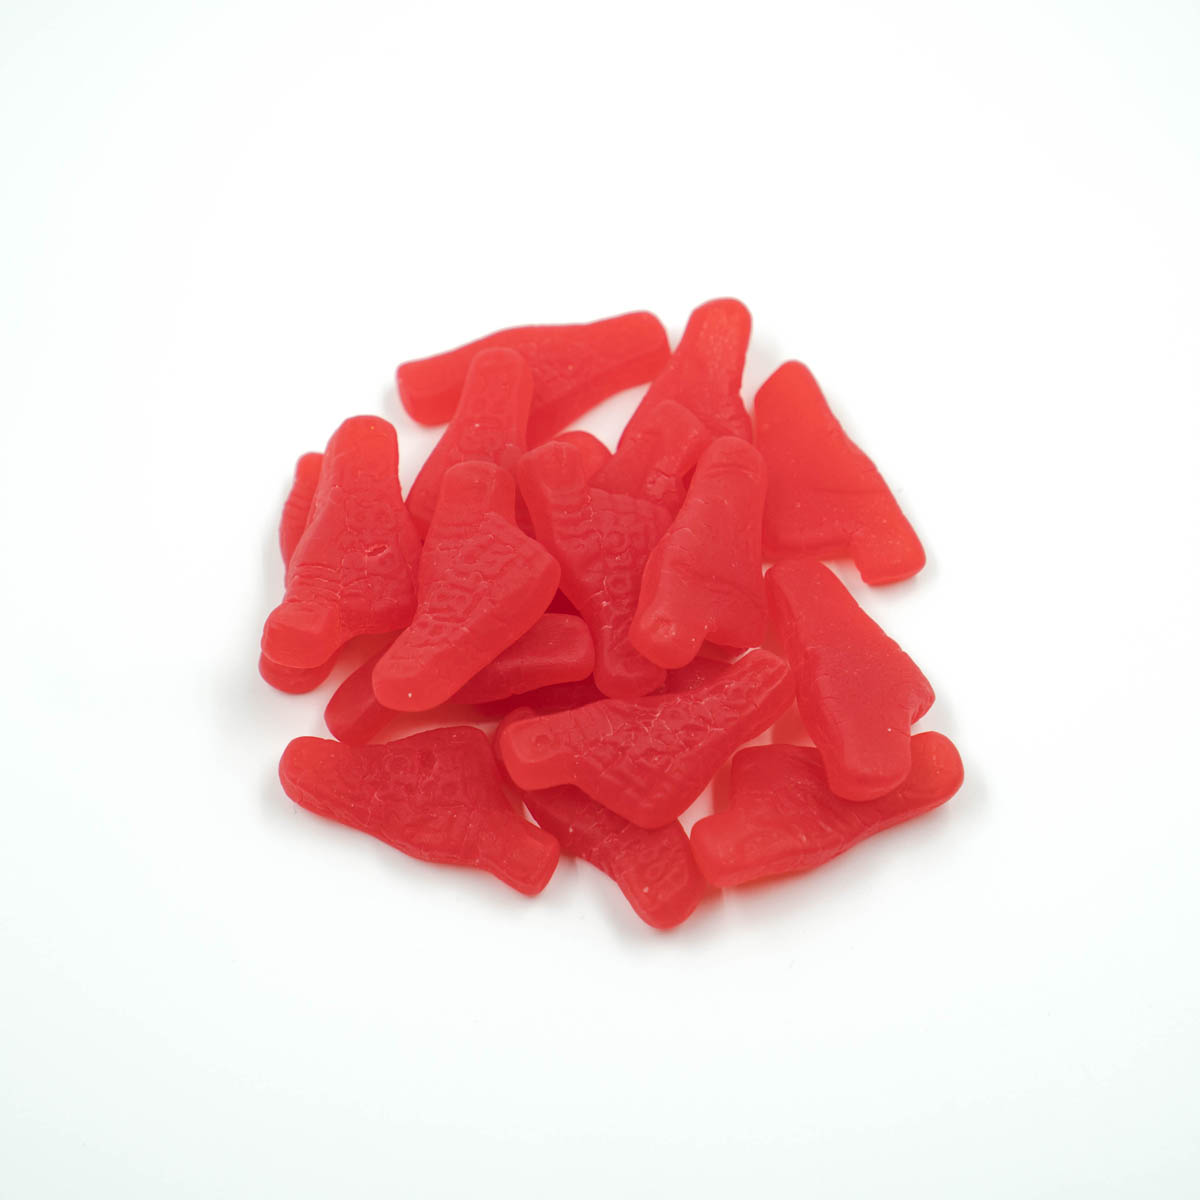 Giant Red Foot Candy